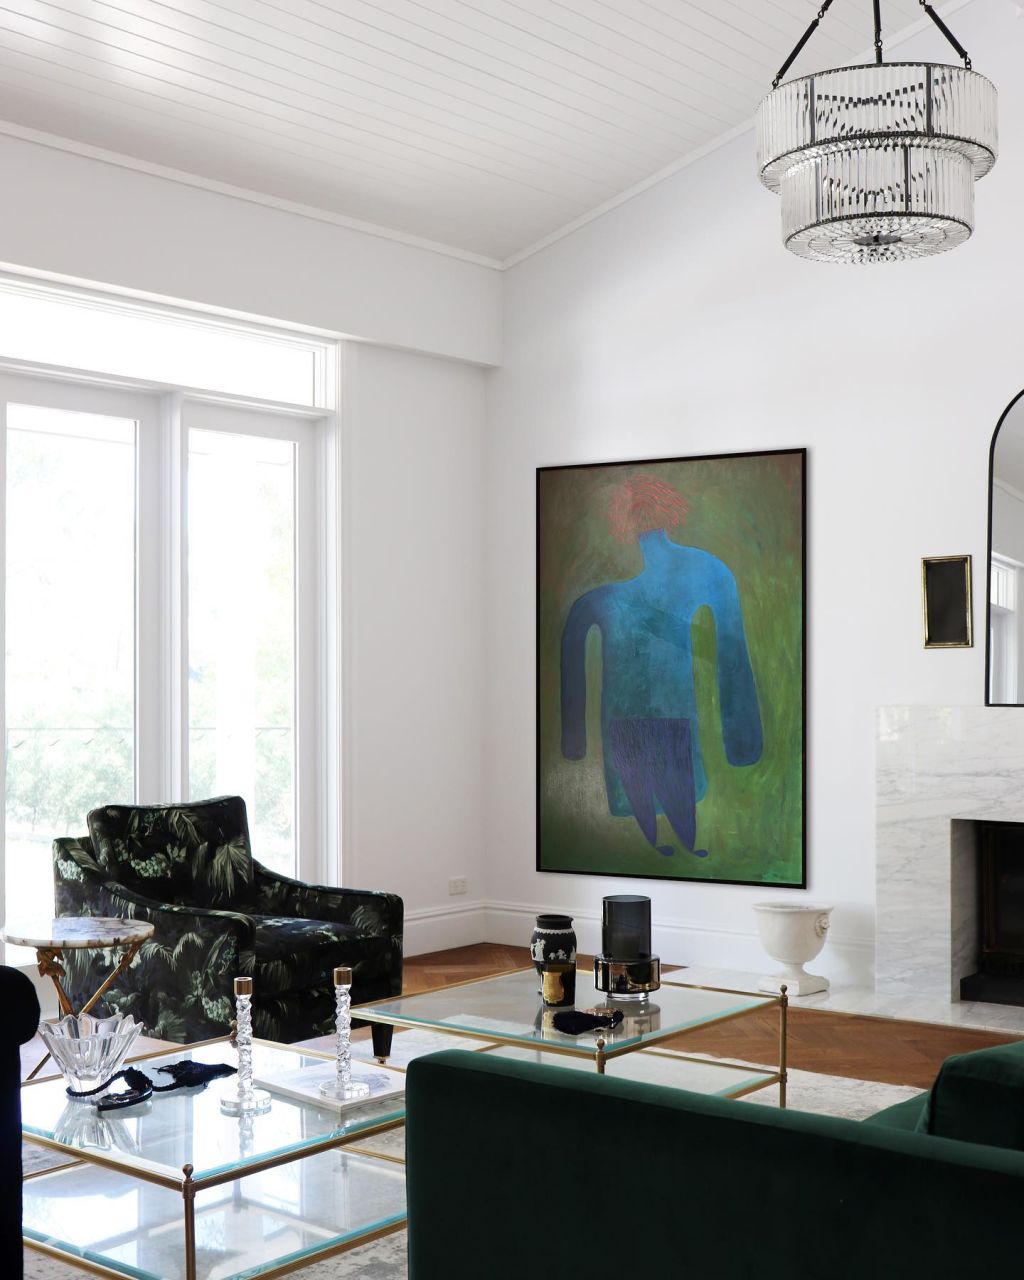 ‘Every artwork has its own story to tell’: How art can make a house a ...